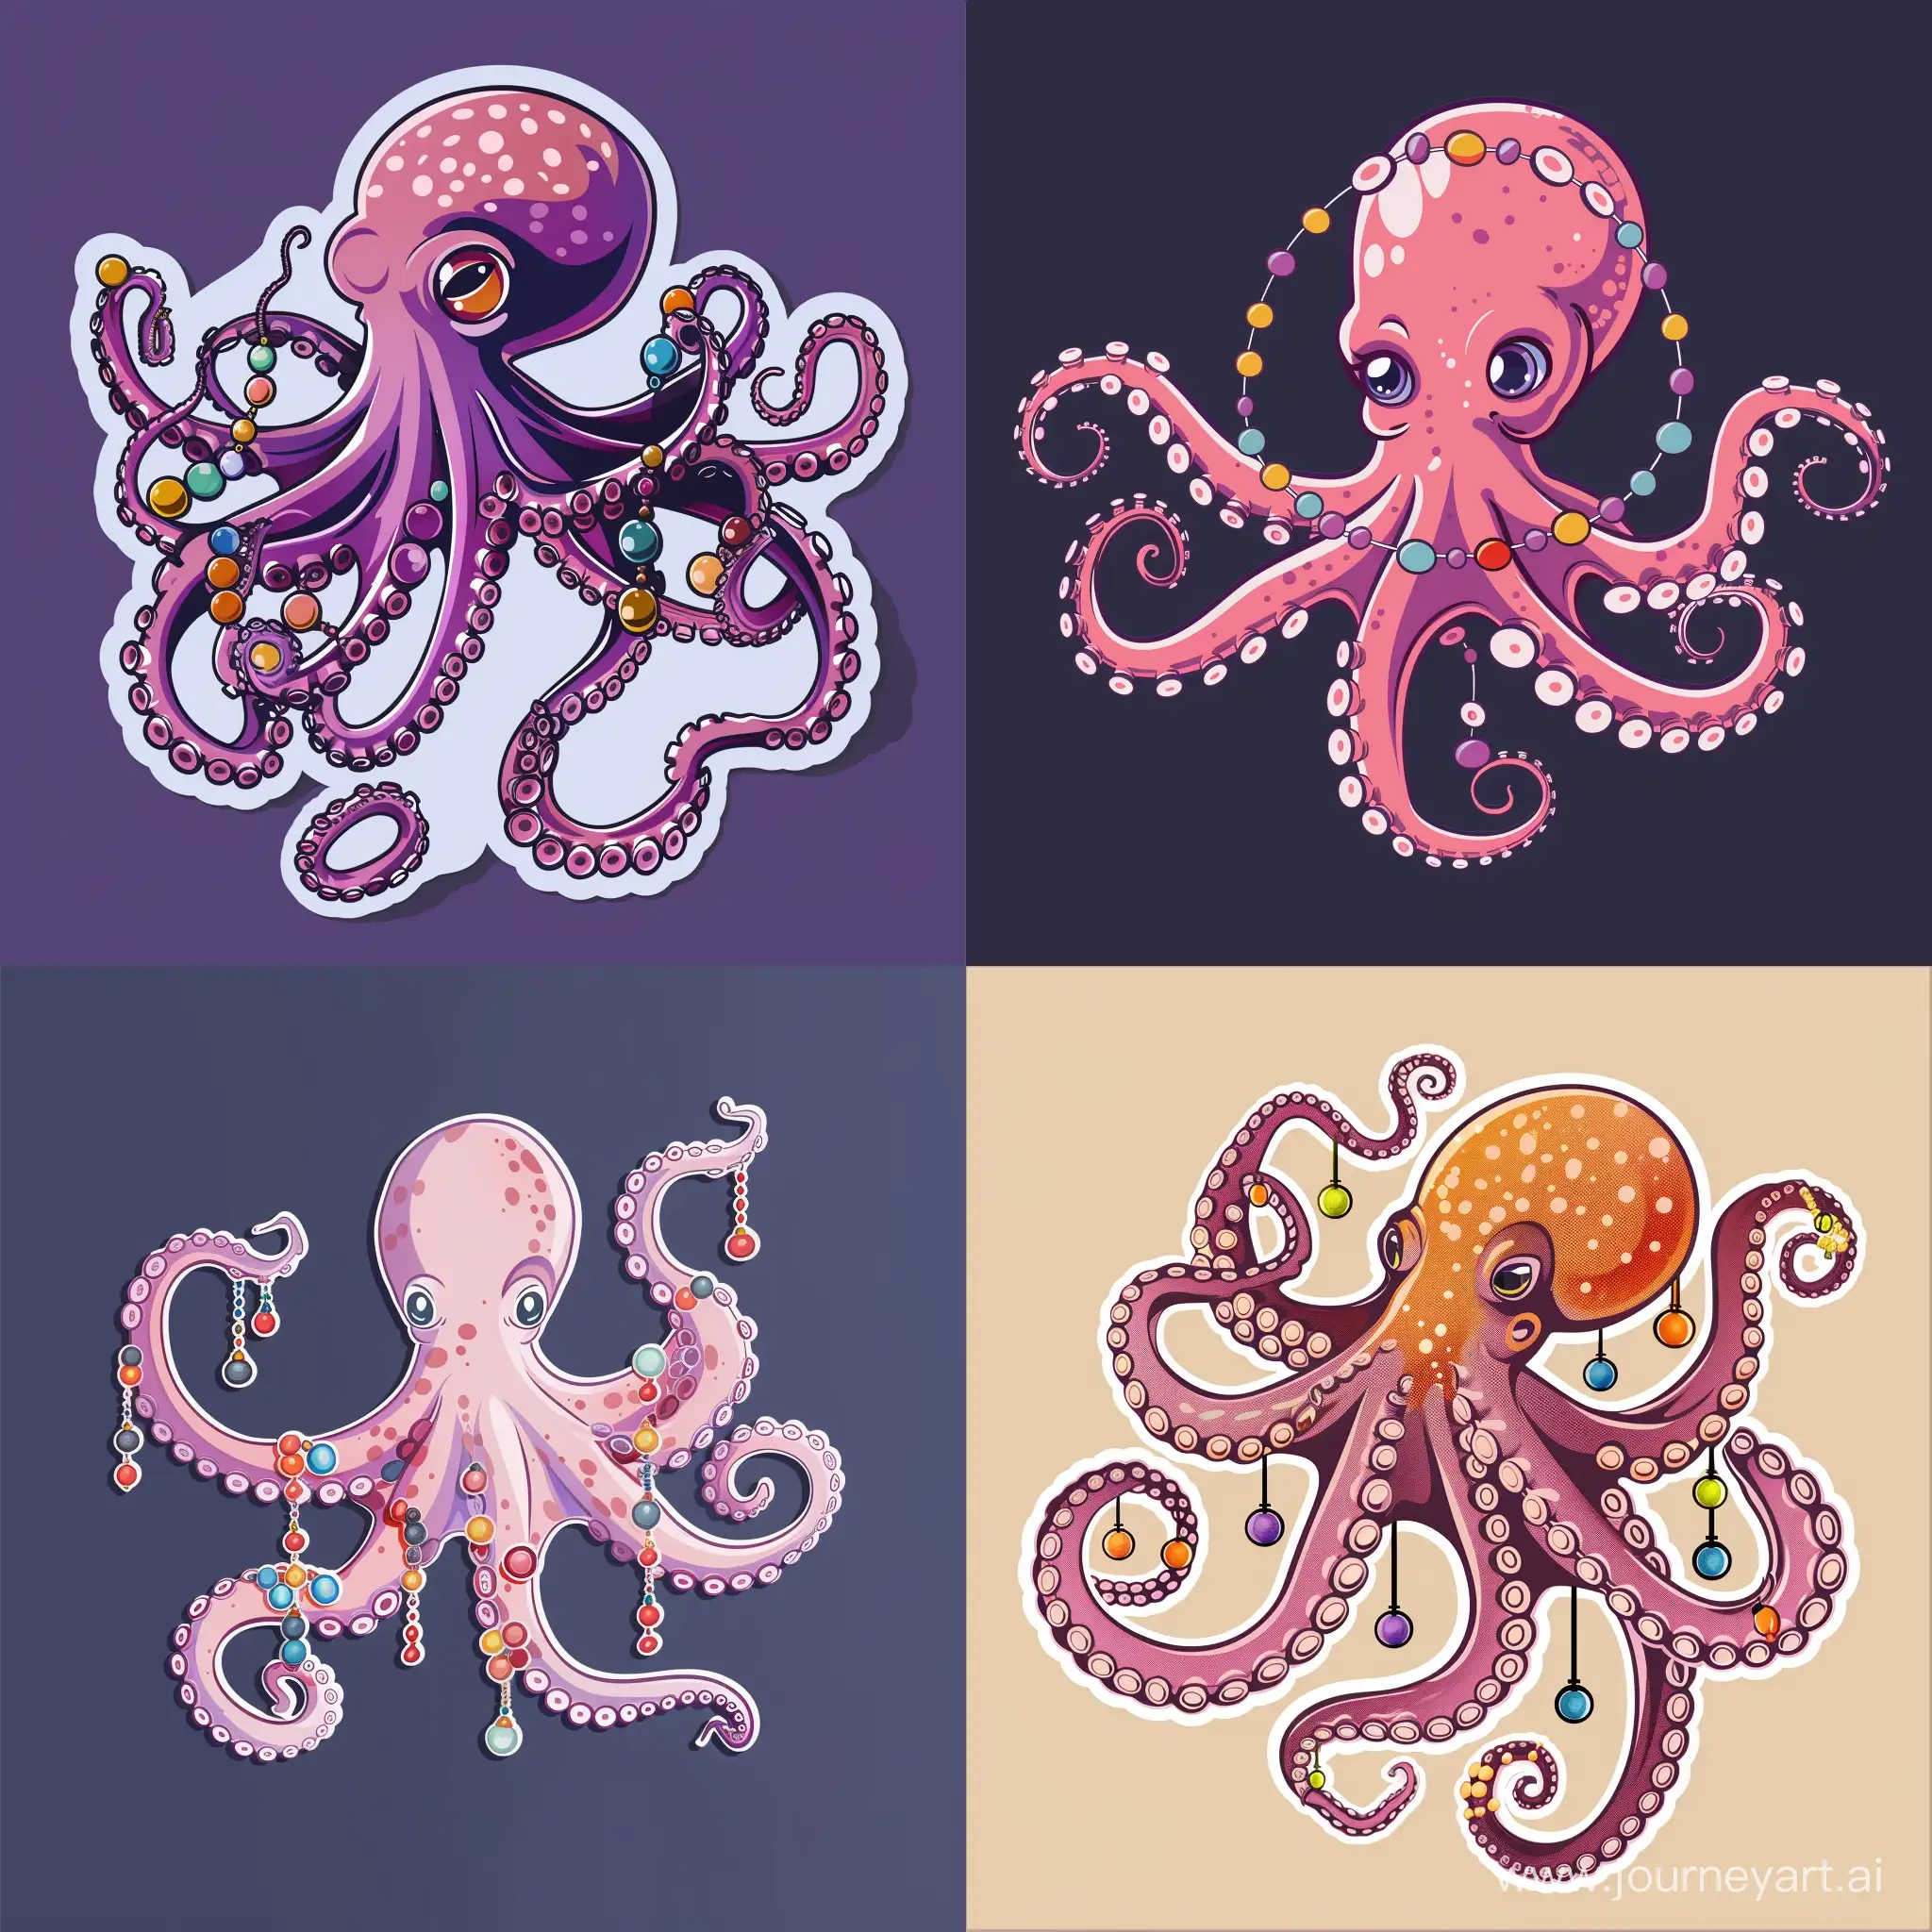 sticker design with the image of a cute octopus holding beads in its tentacles, in vector style, high quality details